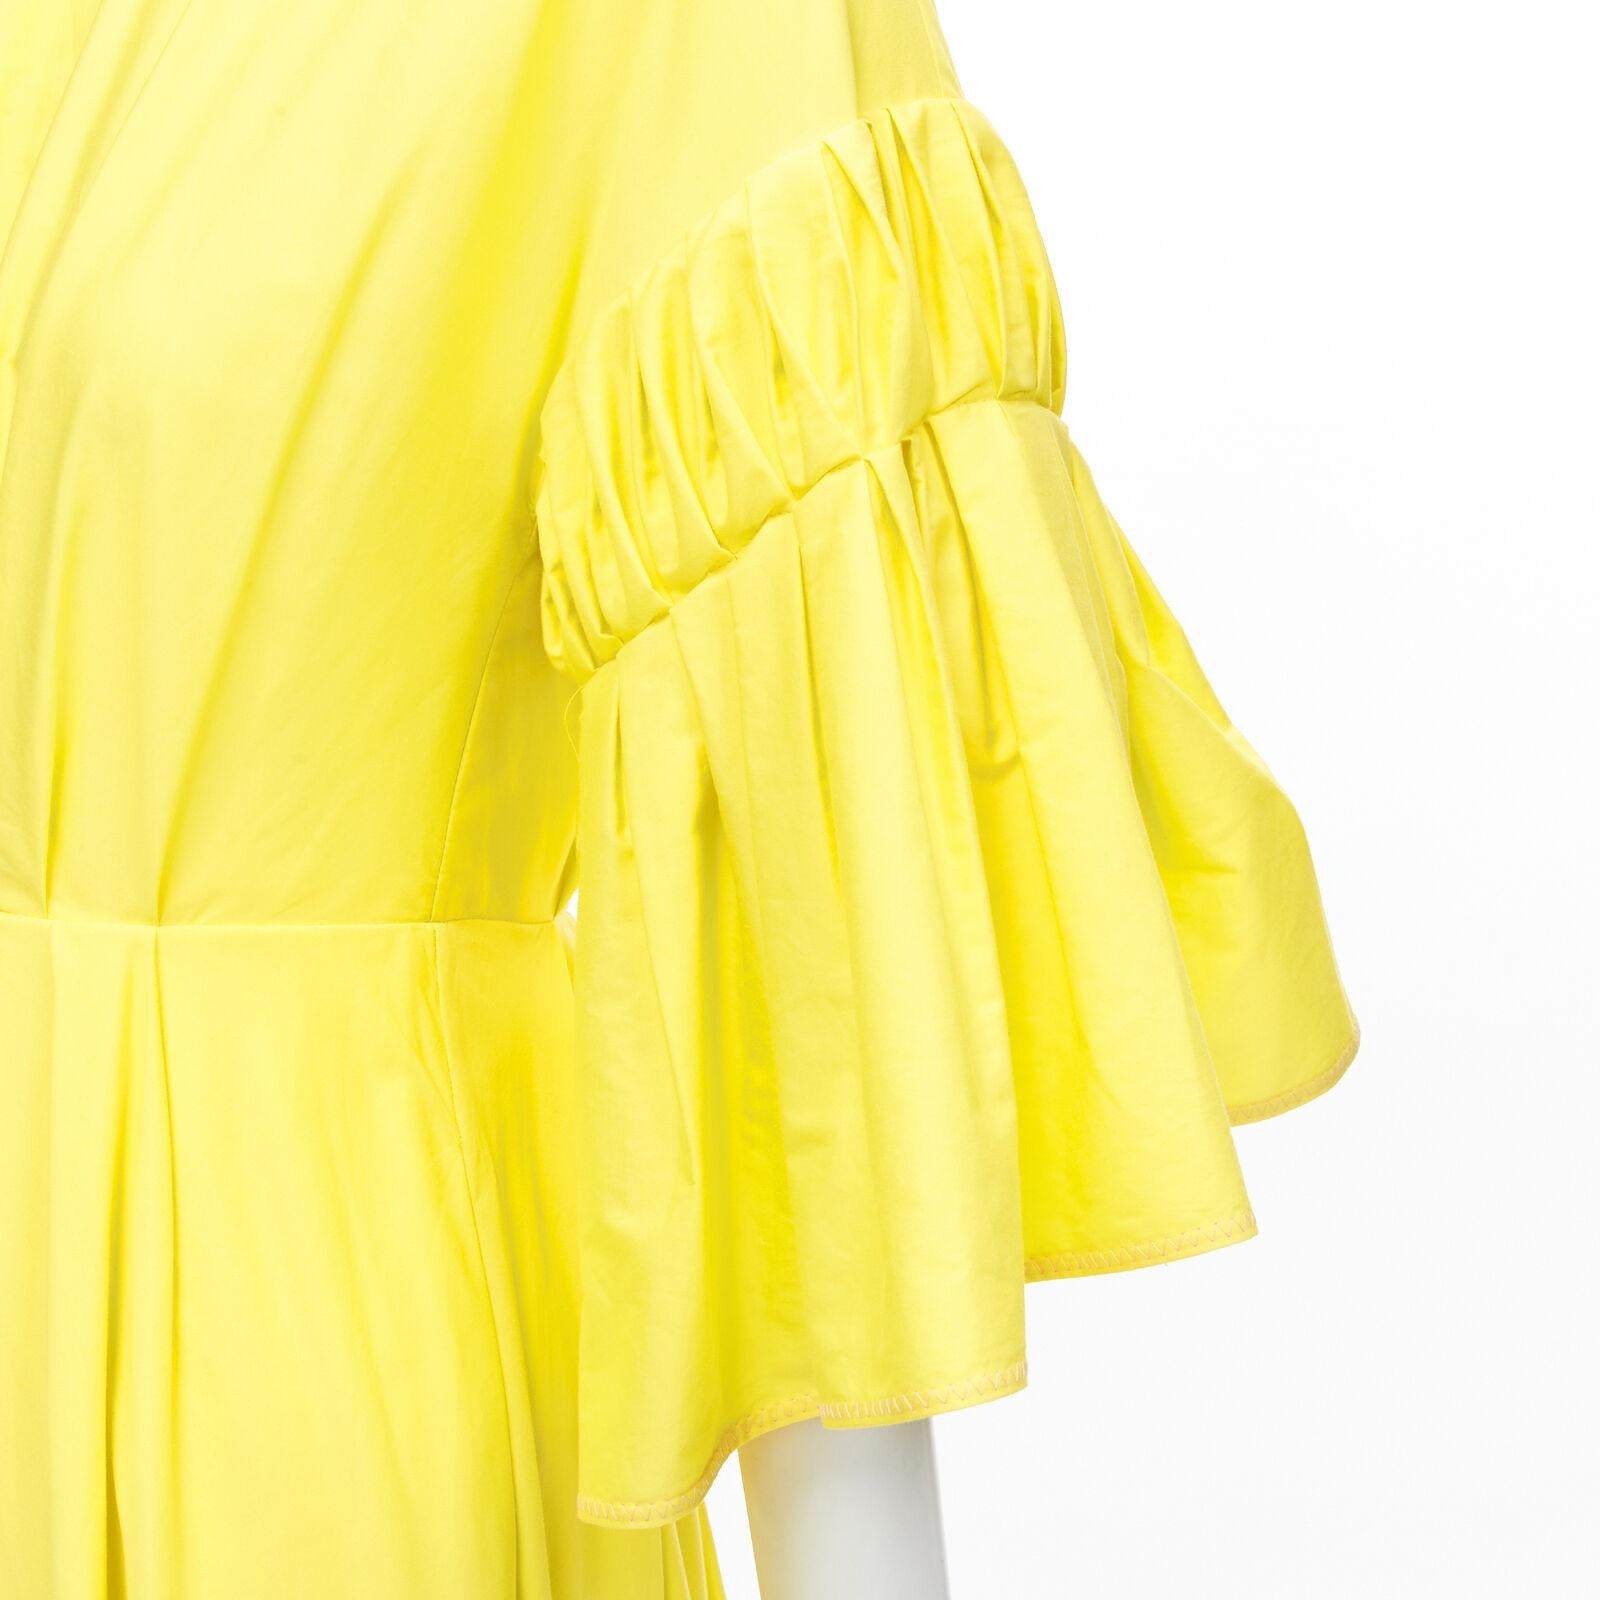 ROKSANDA sunshine yellow cotton origami pleat flared sleeves A-line dress UK6 XS
Reference: AAWC/A00193
Brand: Roksanda
Material: Cotton
Color: Yellow
Pattern: Solid
Closure: Zip
Extra Details: Side side seam pockets
Made in: